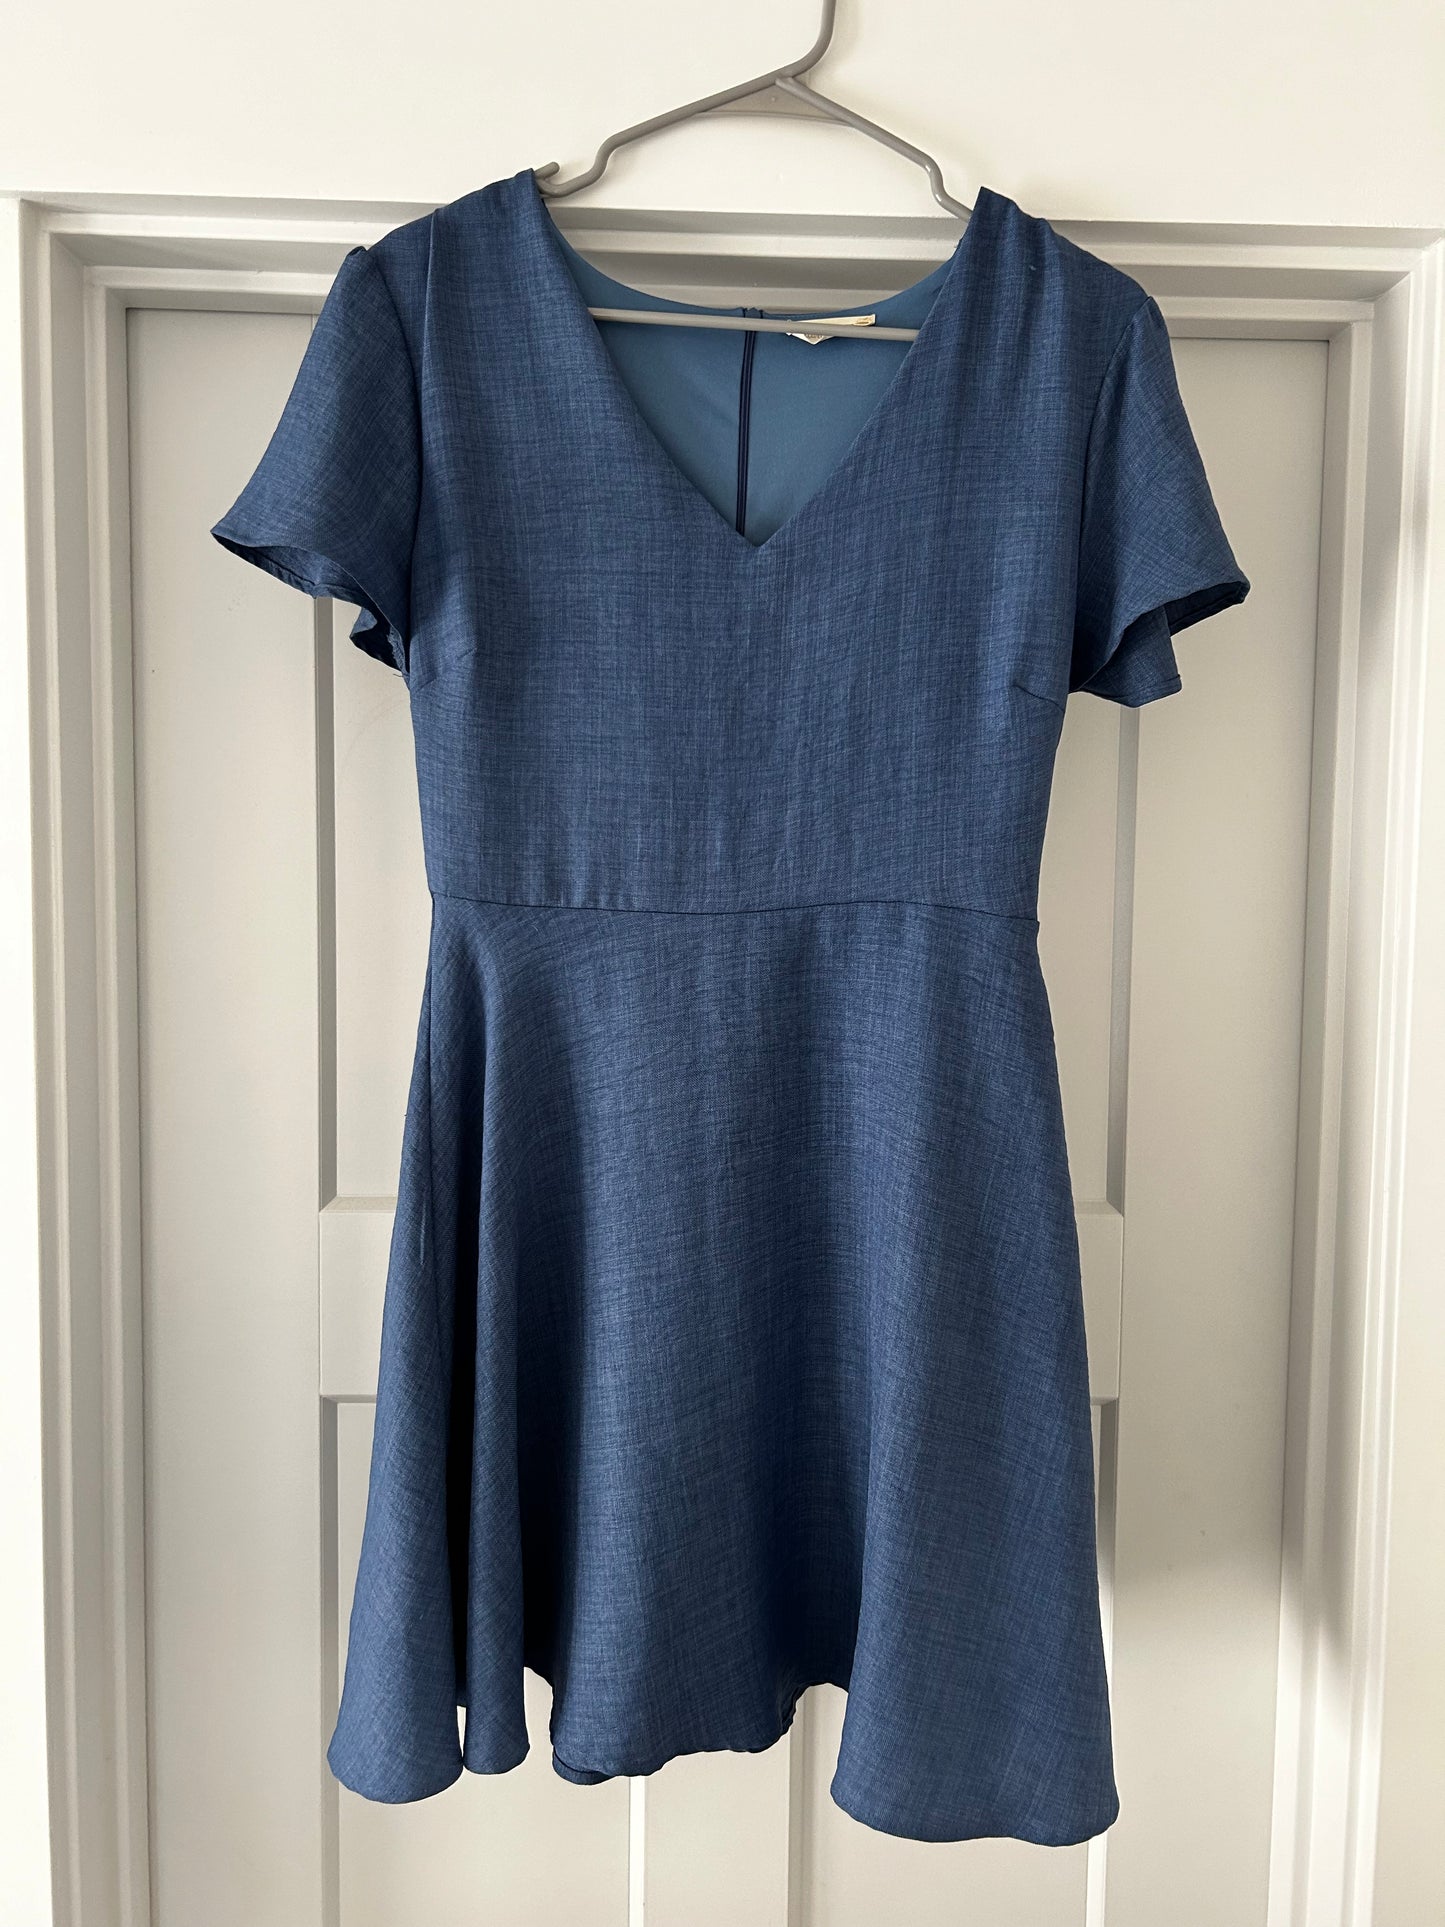 Size Medium Women's Chambray/Jean Altar'd State Dress - see PHOTOS